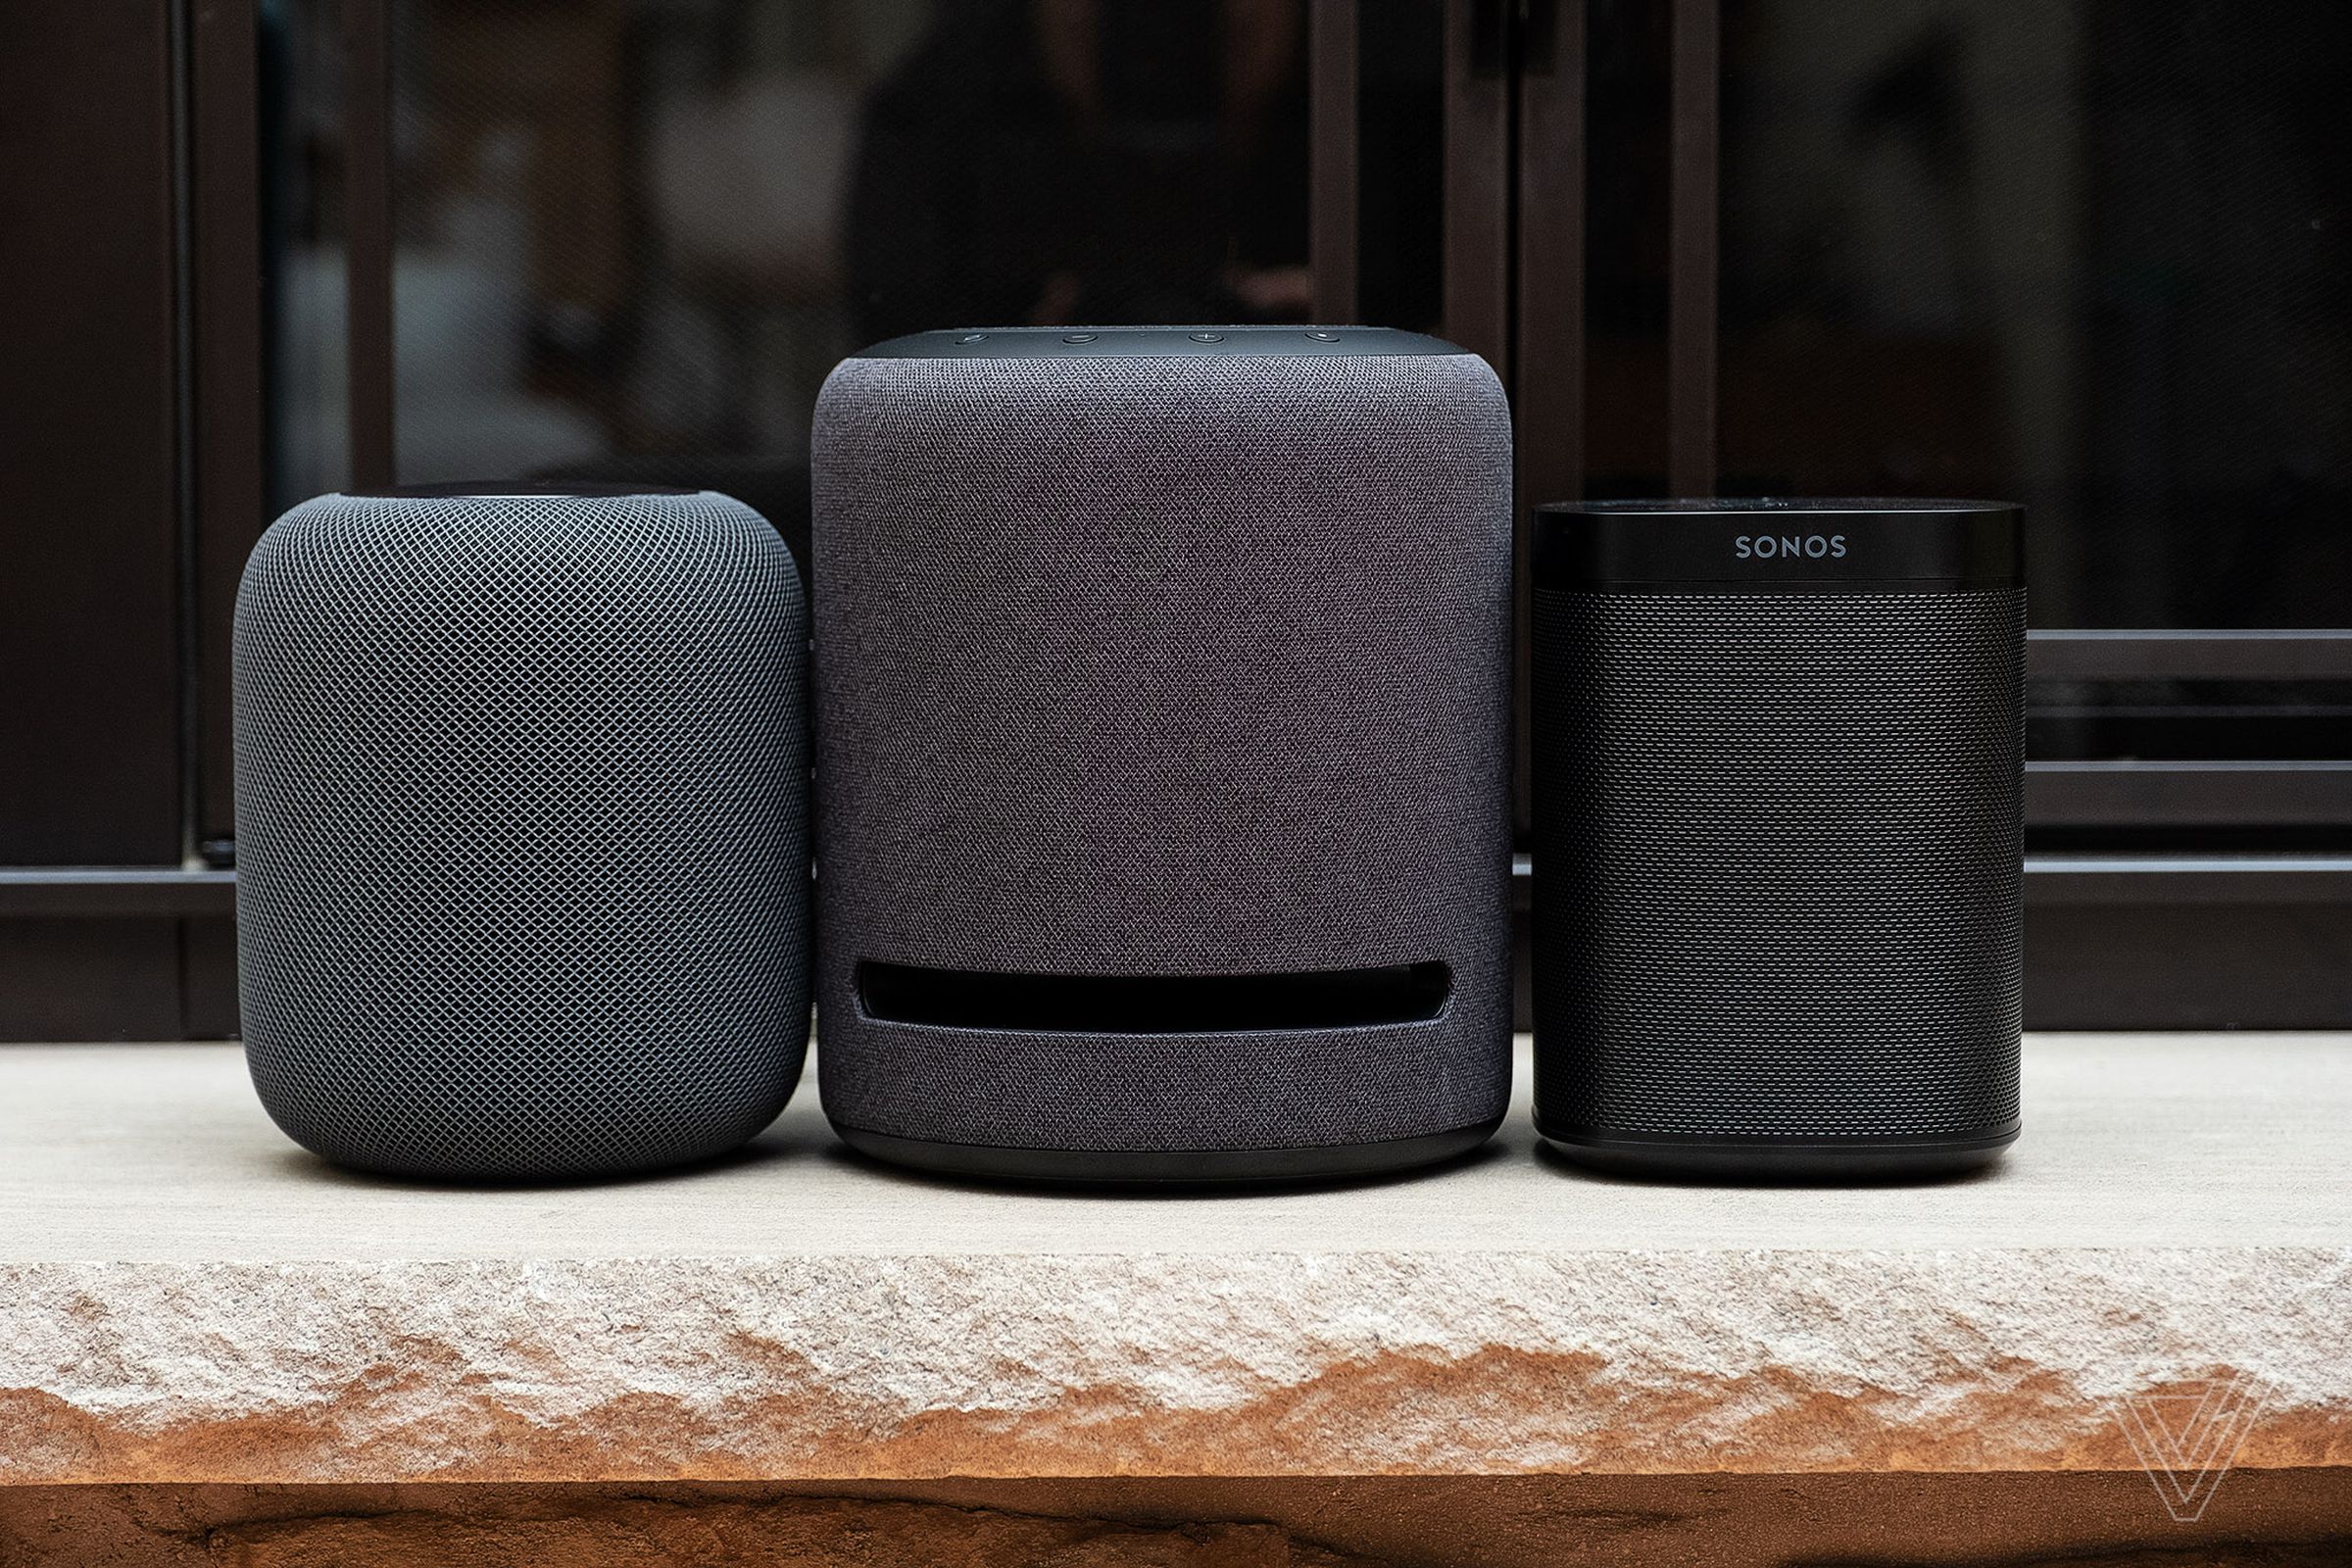 The Studio is larger than the Sonos One or Apple HomePod.